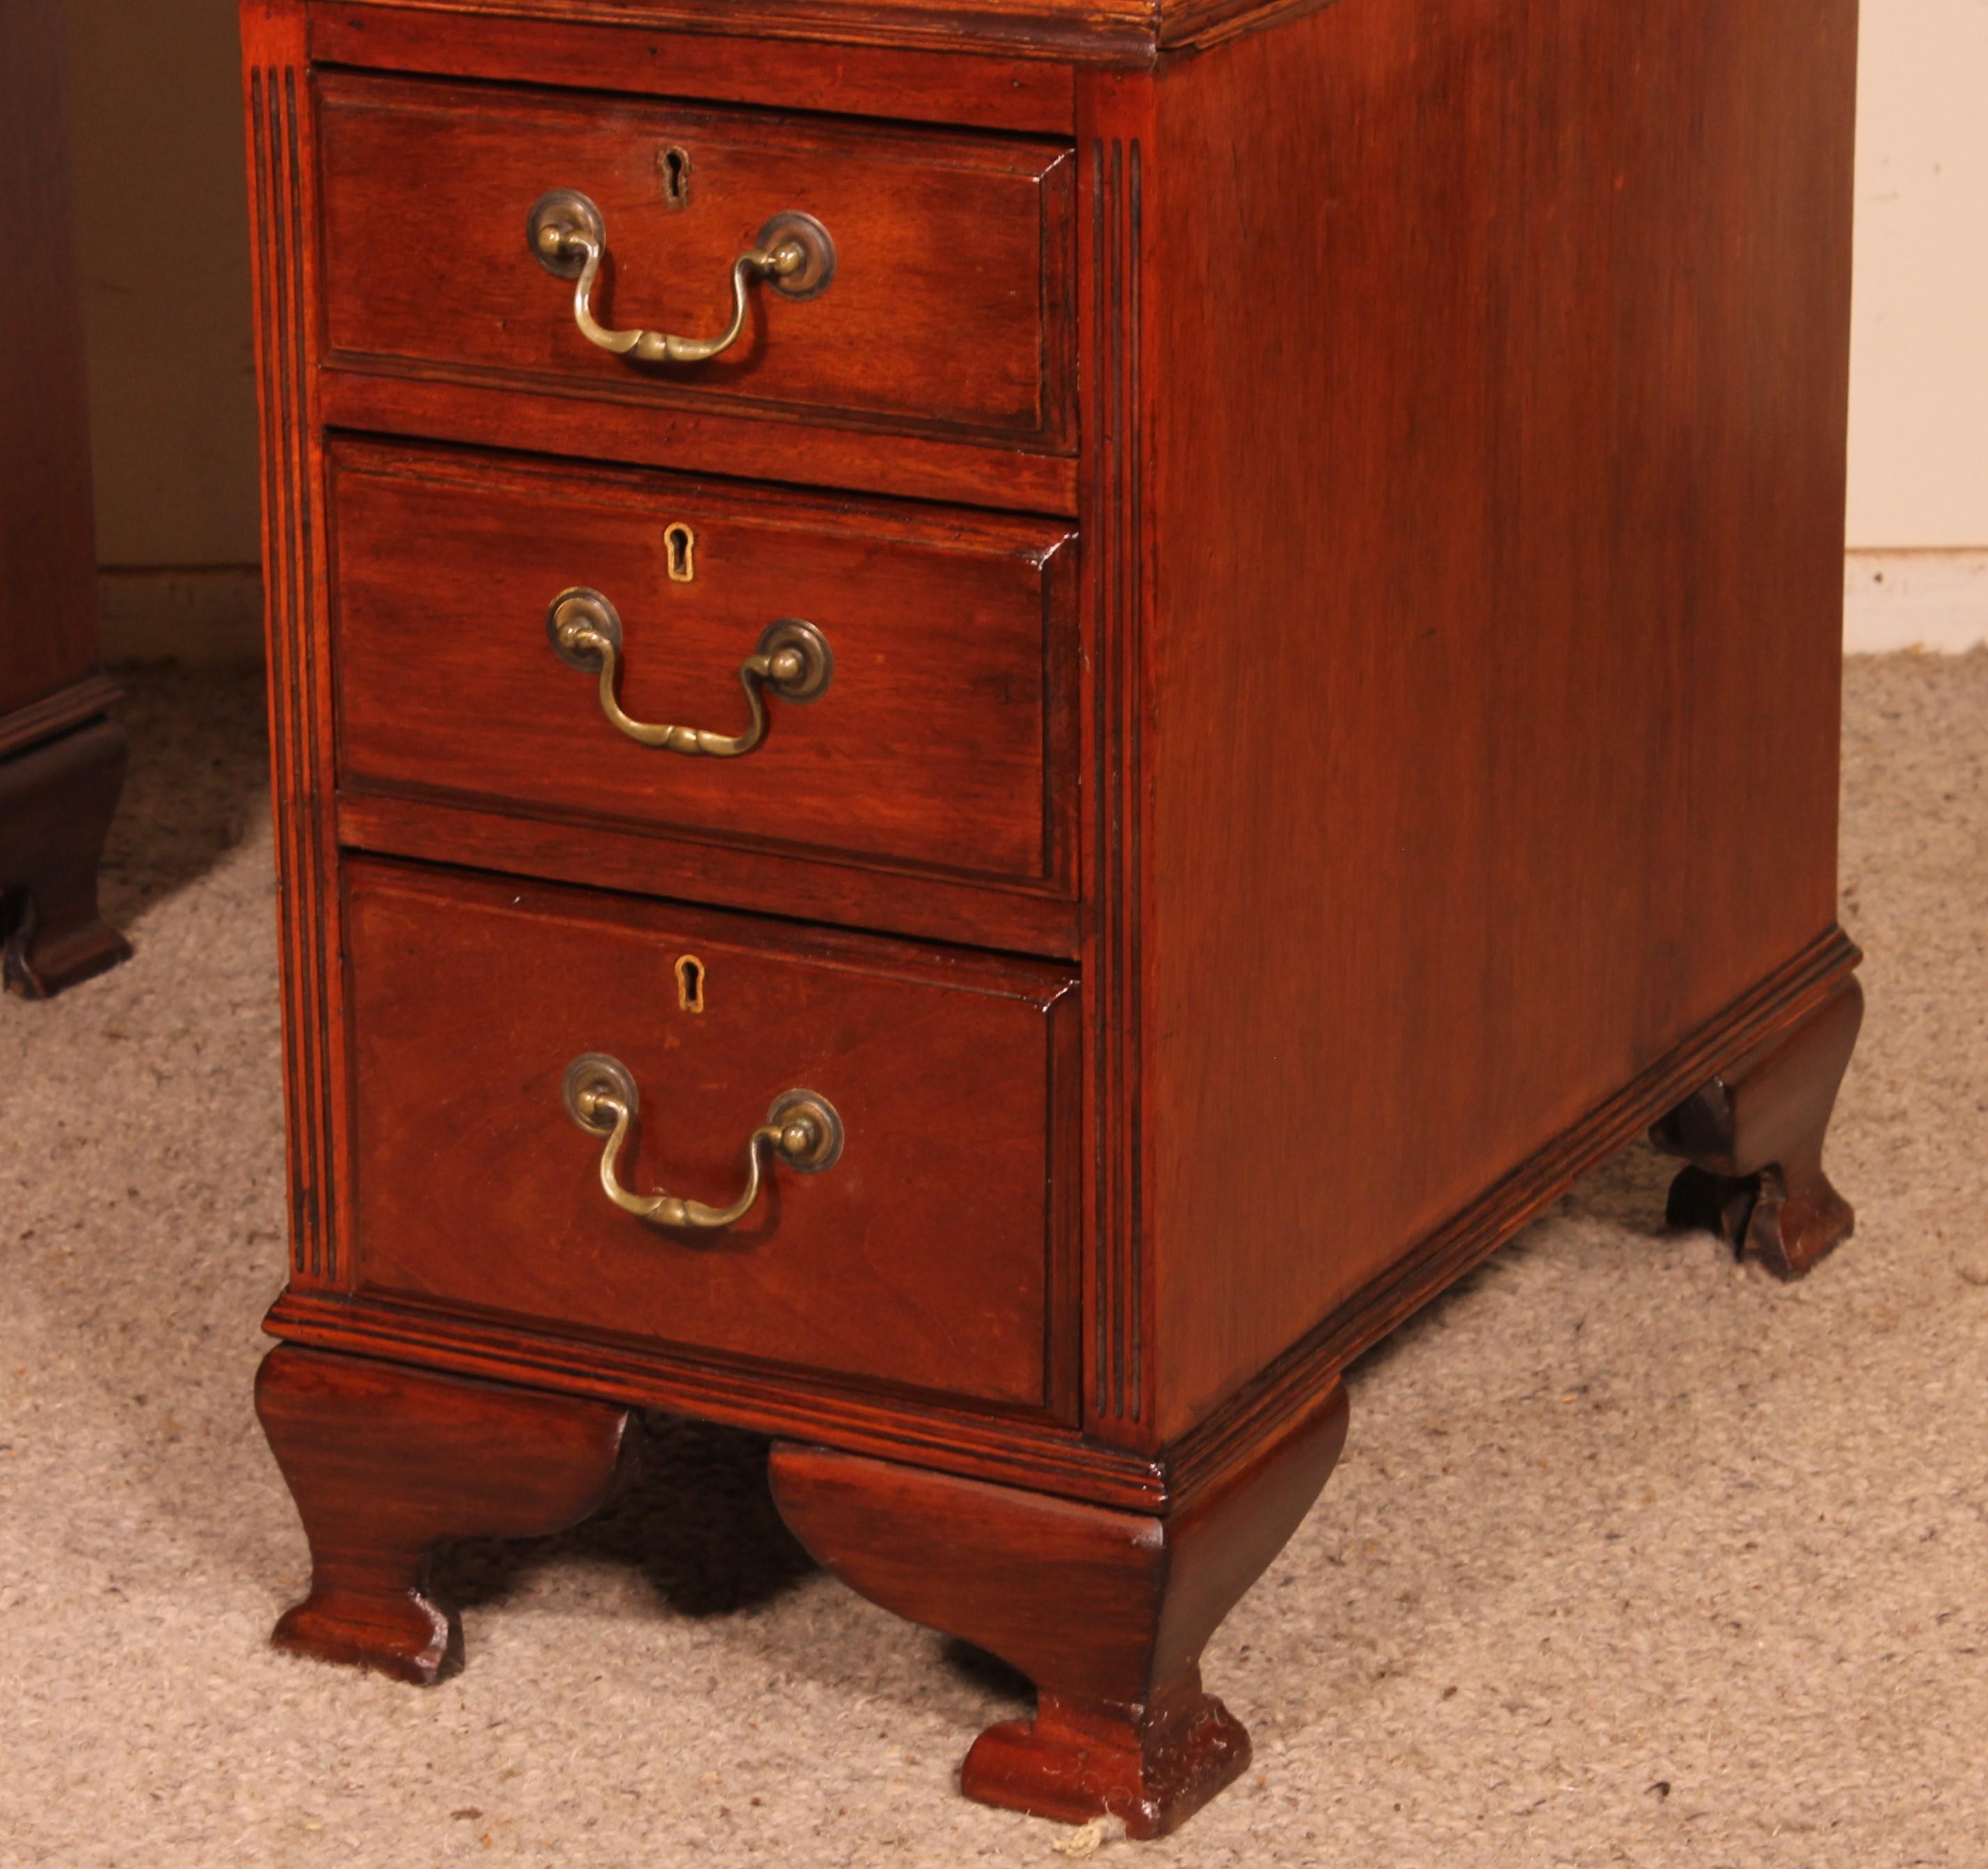 British Small Mahogany Pedestal Desk From The 19 ° Century For Sale